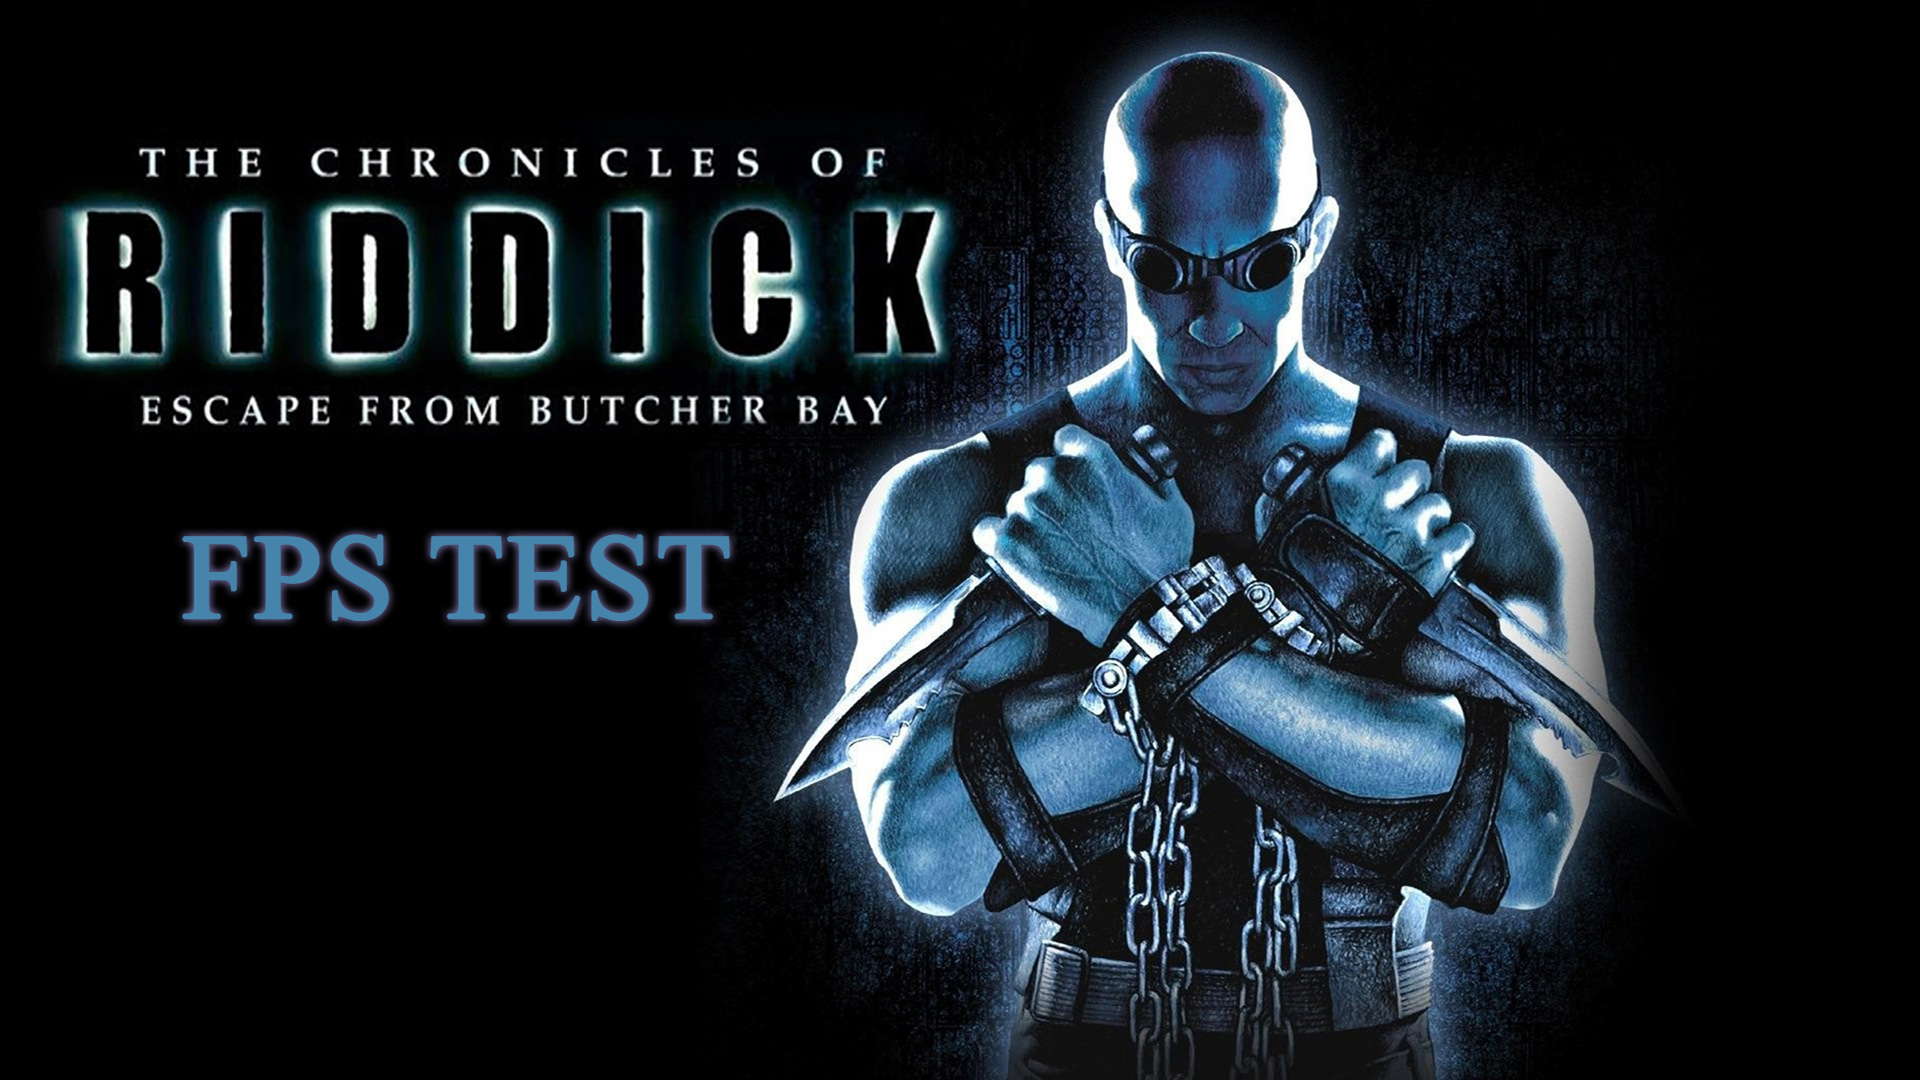 The Chronicles of Riddick: Escape from Butcher Bay. FPS test